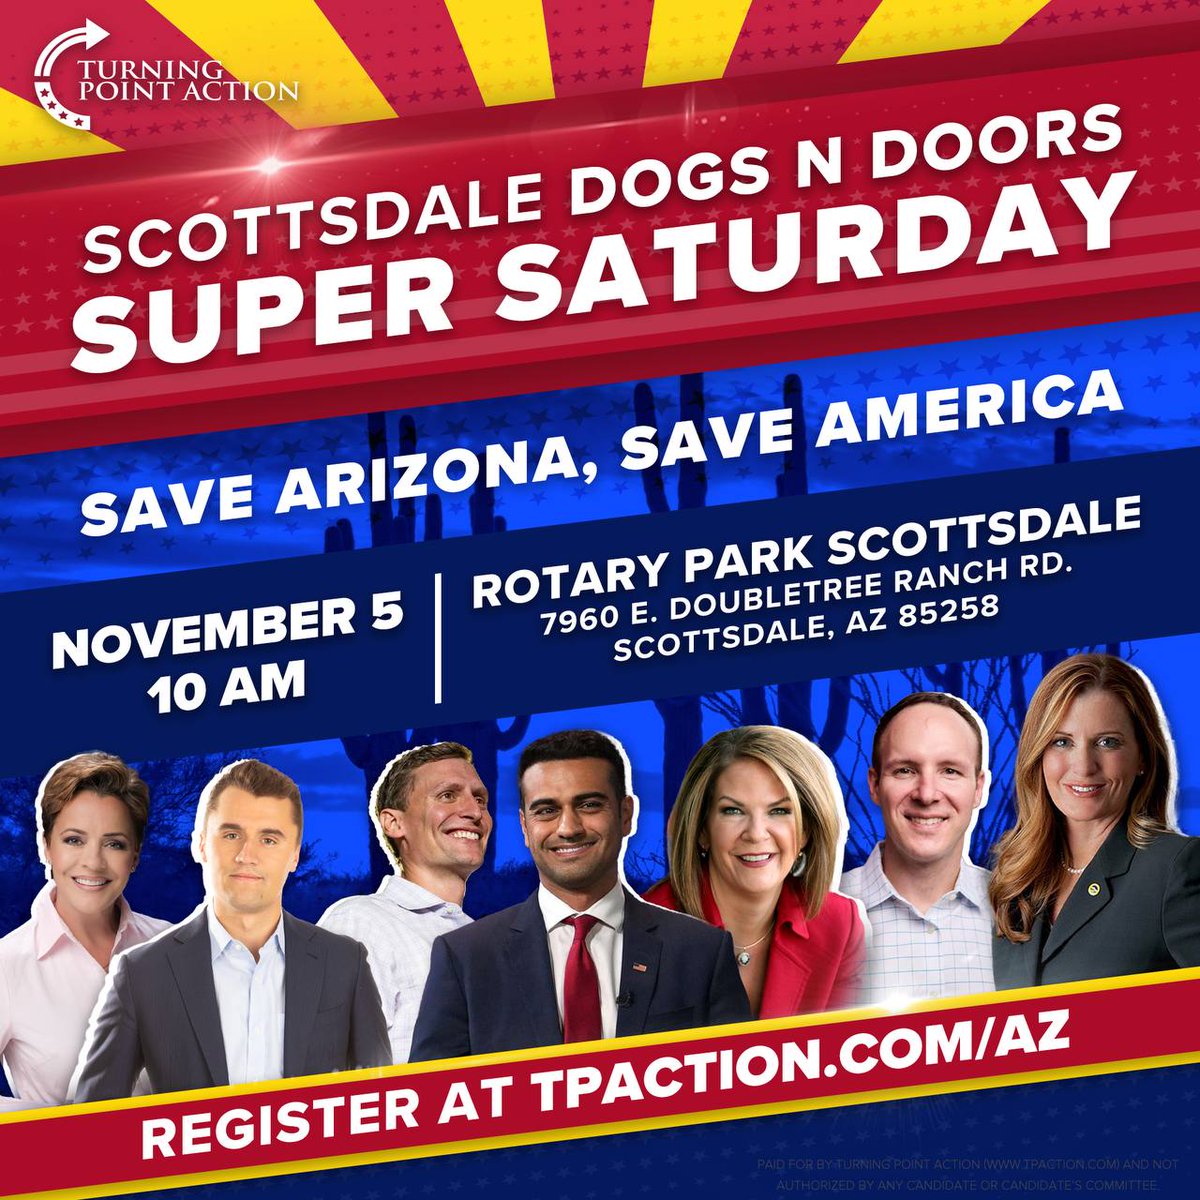 AZ PATRIOTS! Don't miss out on this amazing opportunity! 🤩 Hear from a STAR-STUDDED lineup of speakers including @charliekirk11, @KariLake, @bgmasters, @AbrahamHamadeh AND MORE and make an impact on your community to SAVE AMERICA! Make sure you RSVP! ➡️ TPAction.com/AZ